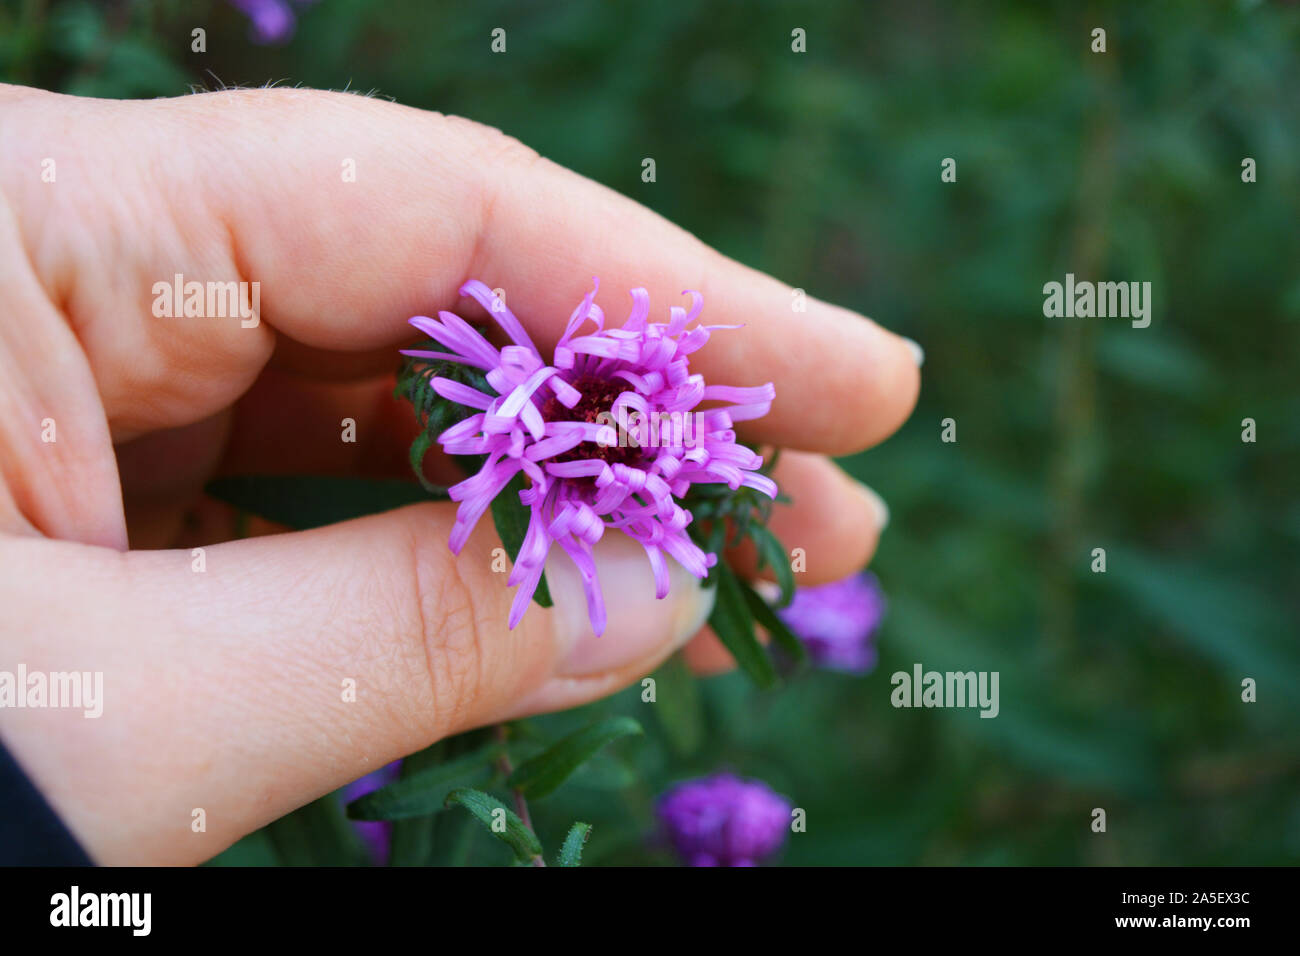 Bright and colorful bush with large purple flowers, Symphyotrichum novi-belgii, New York aster in a female hand. Stock Photo